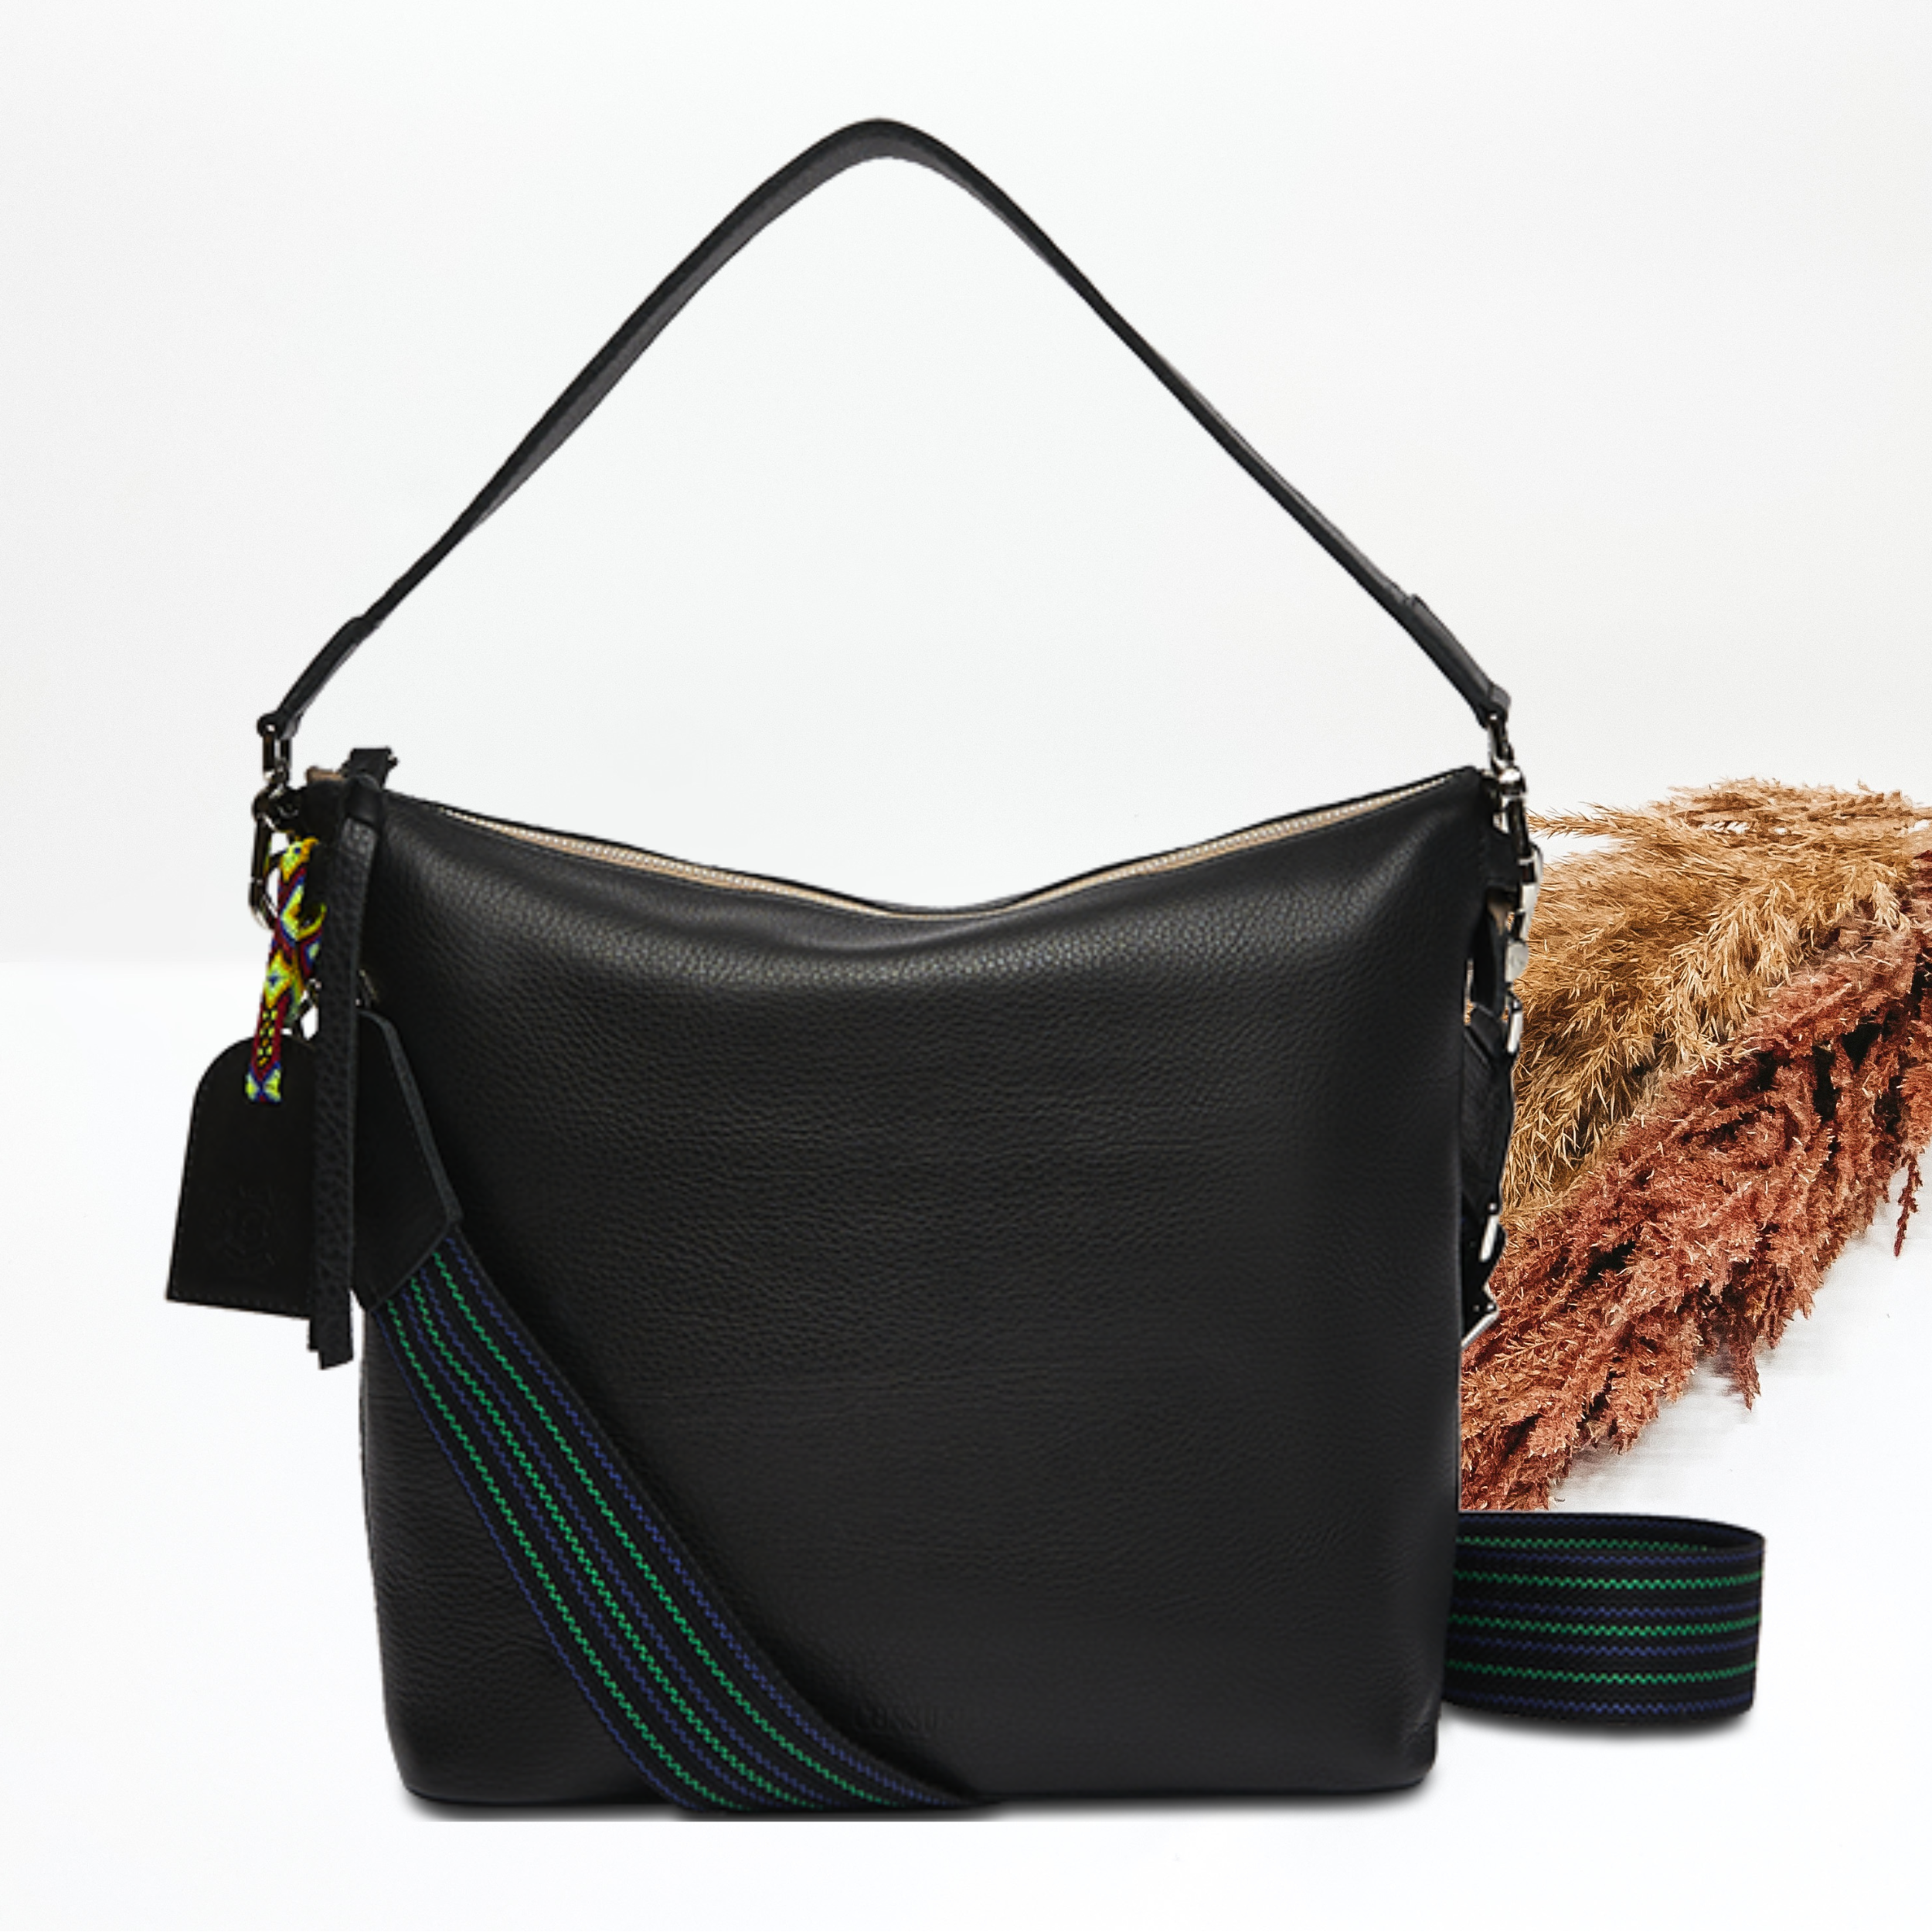 Pictured on a white background is black leather hobo bag with a black shoulder strap. This bag also includes a striped crossbody strap., black tassel on the zipper and a black charm.